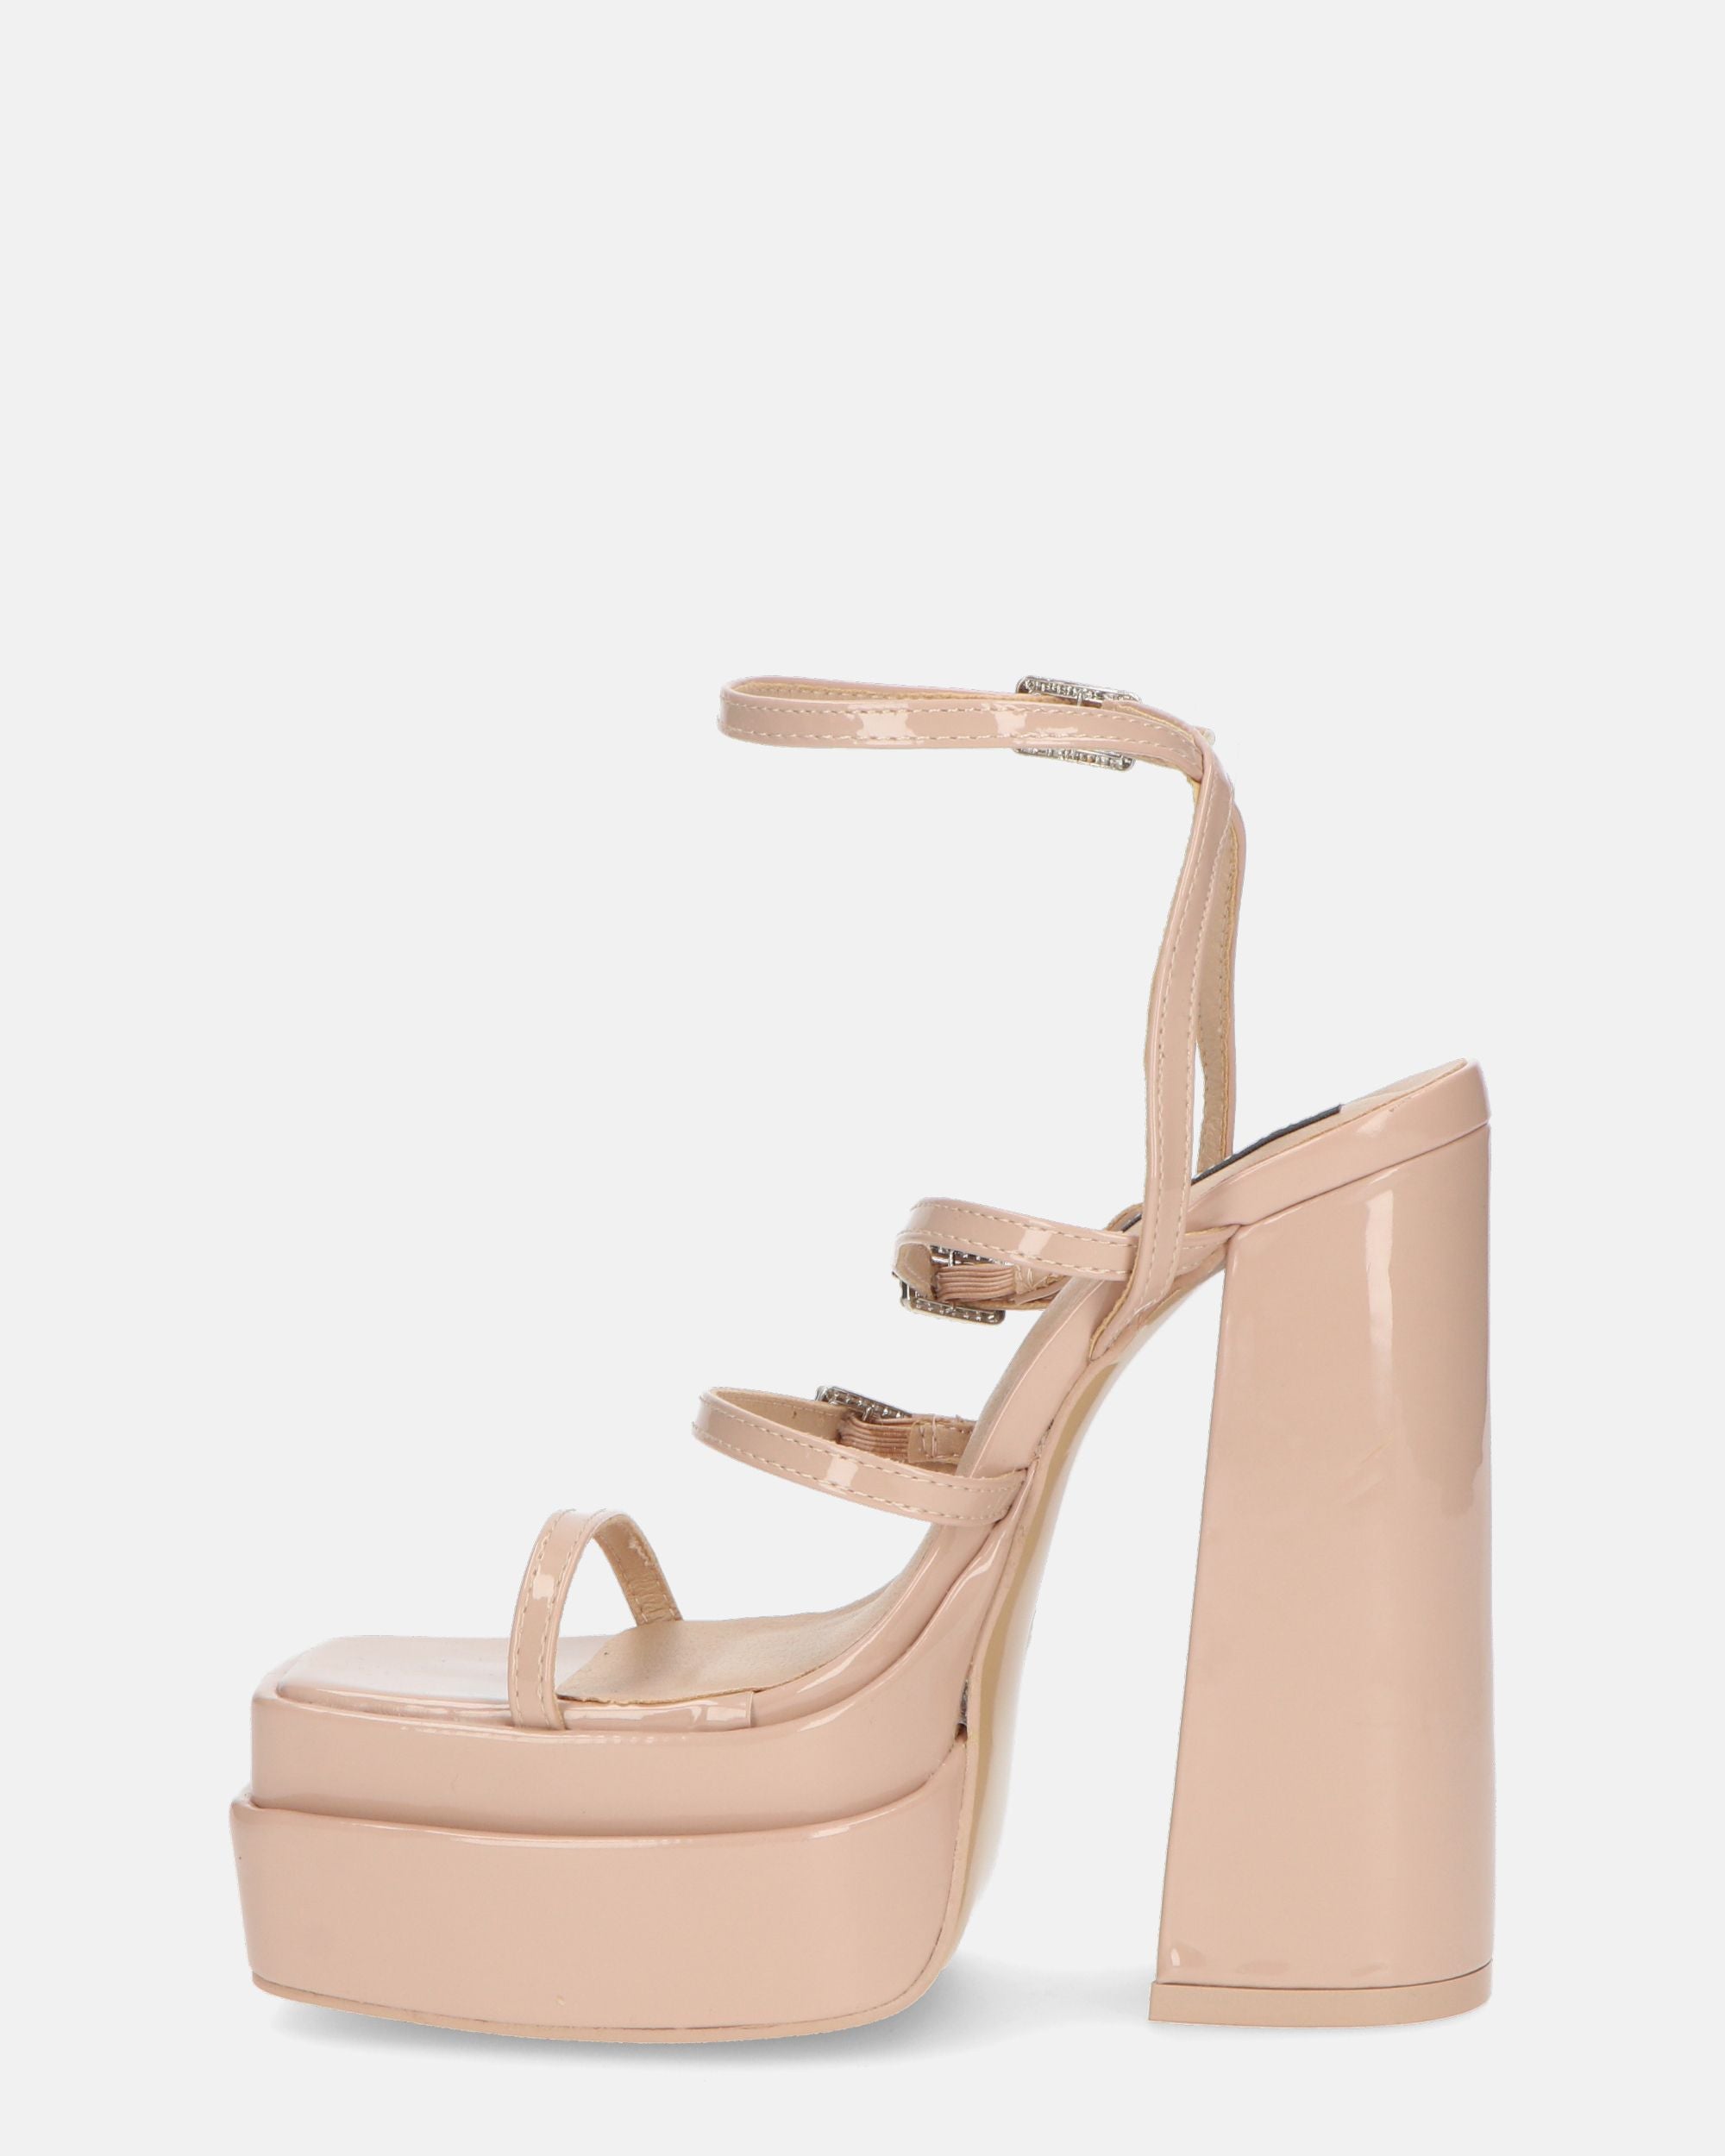 TEXA - sandals with strap and high heel in beige